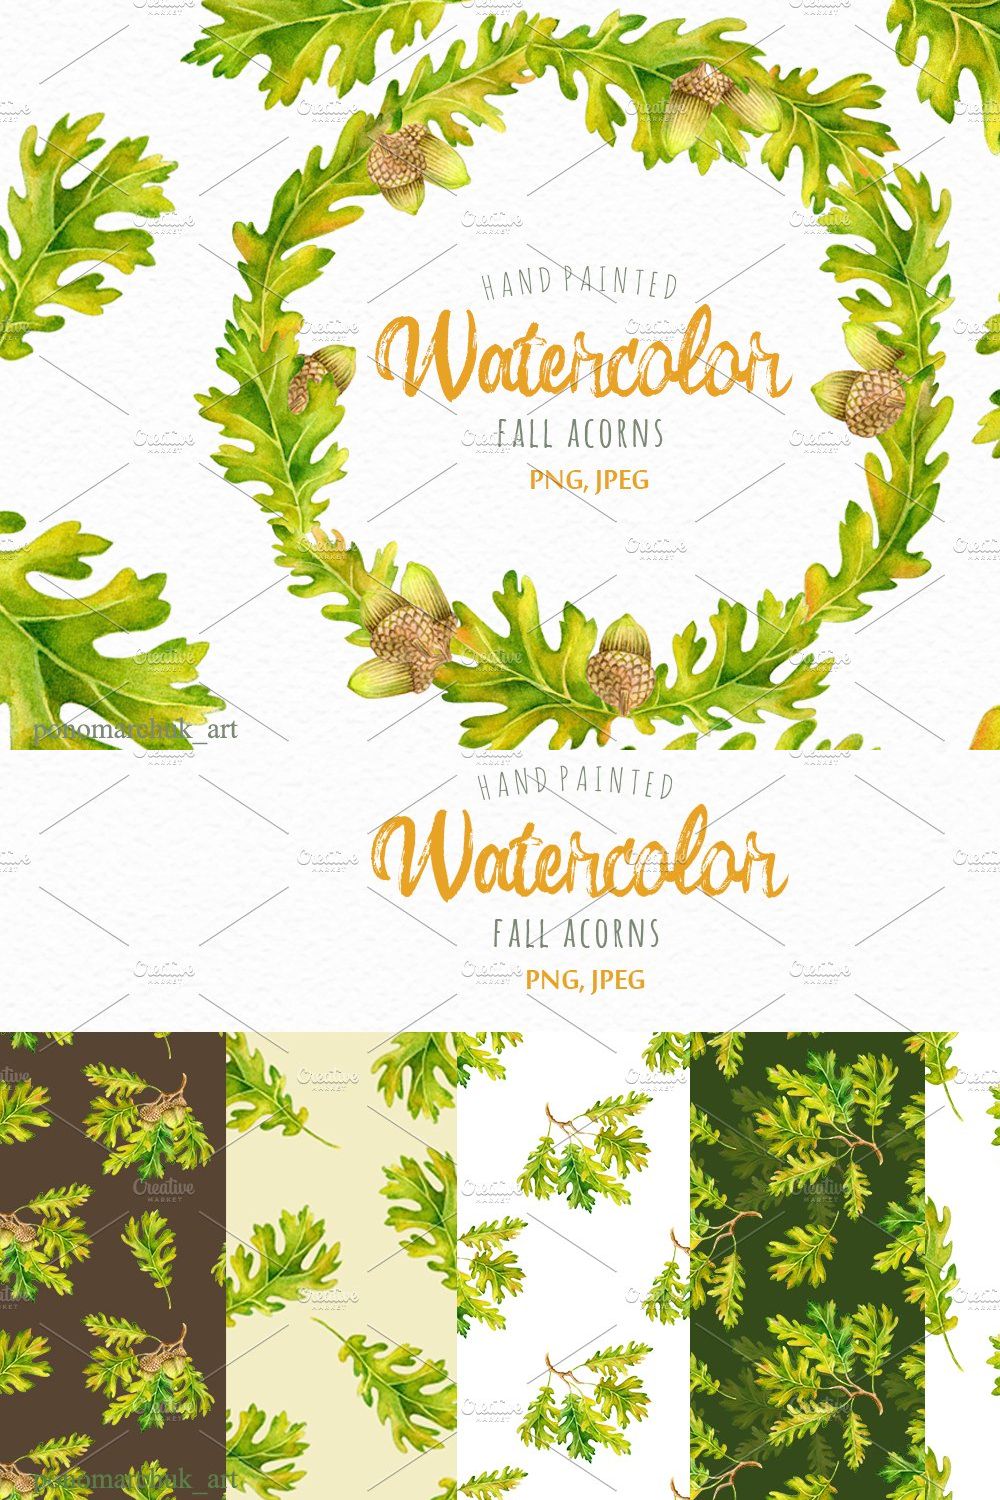 Watercolor Fall acorns collection pinterest preview image.